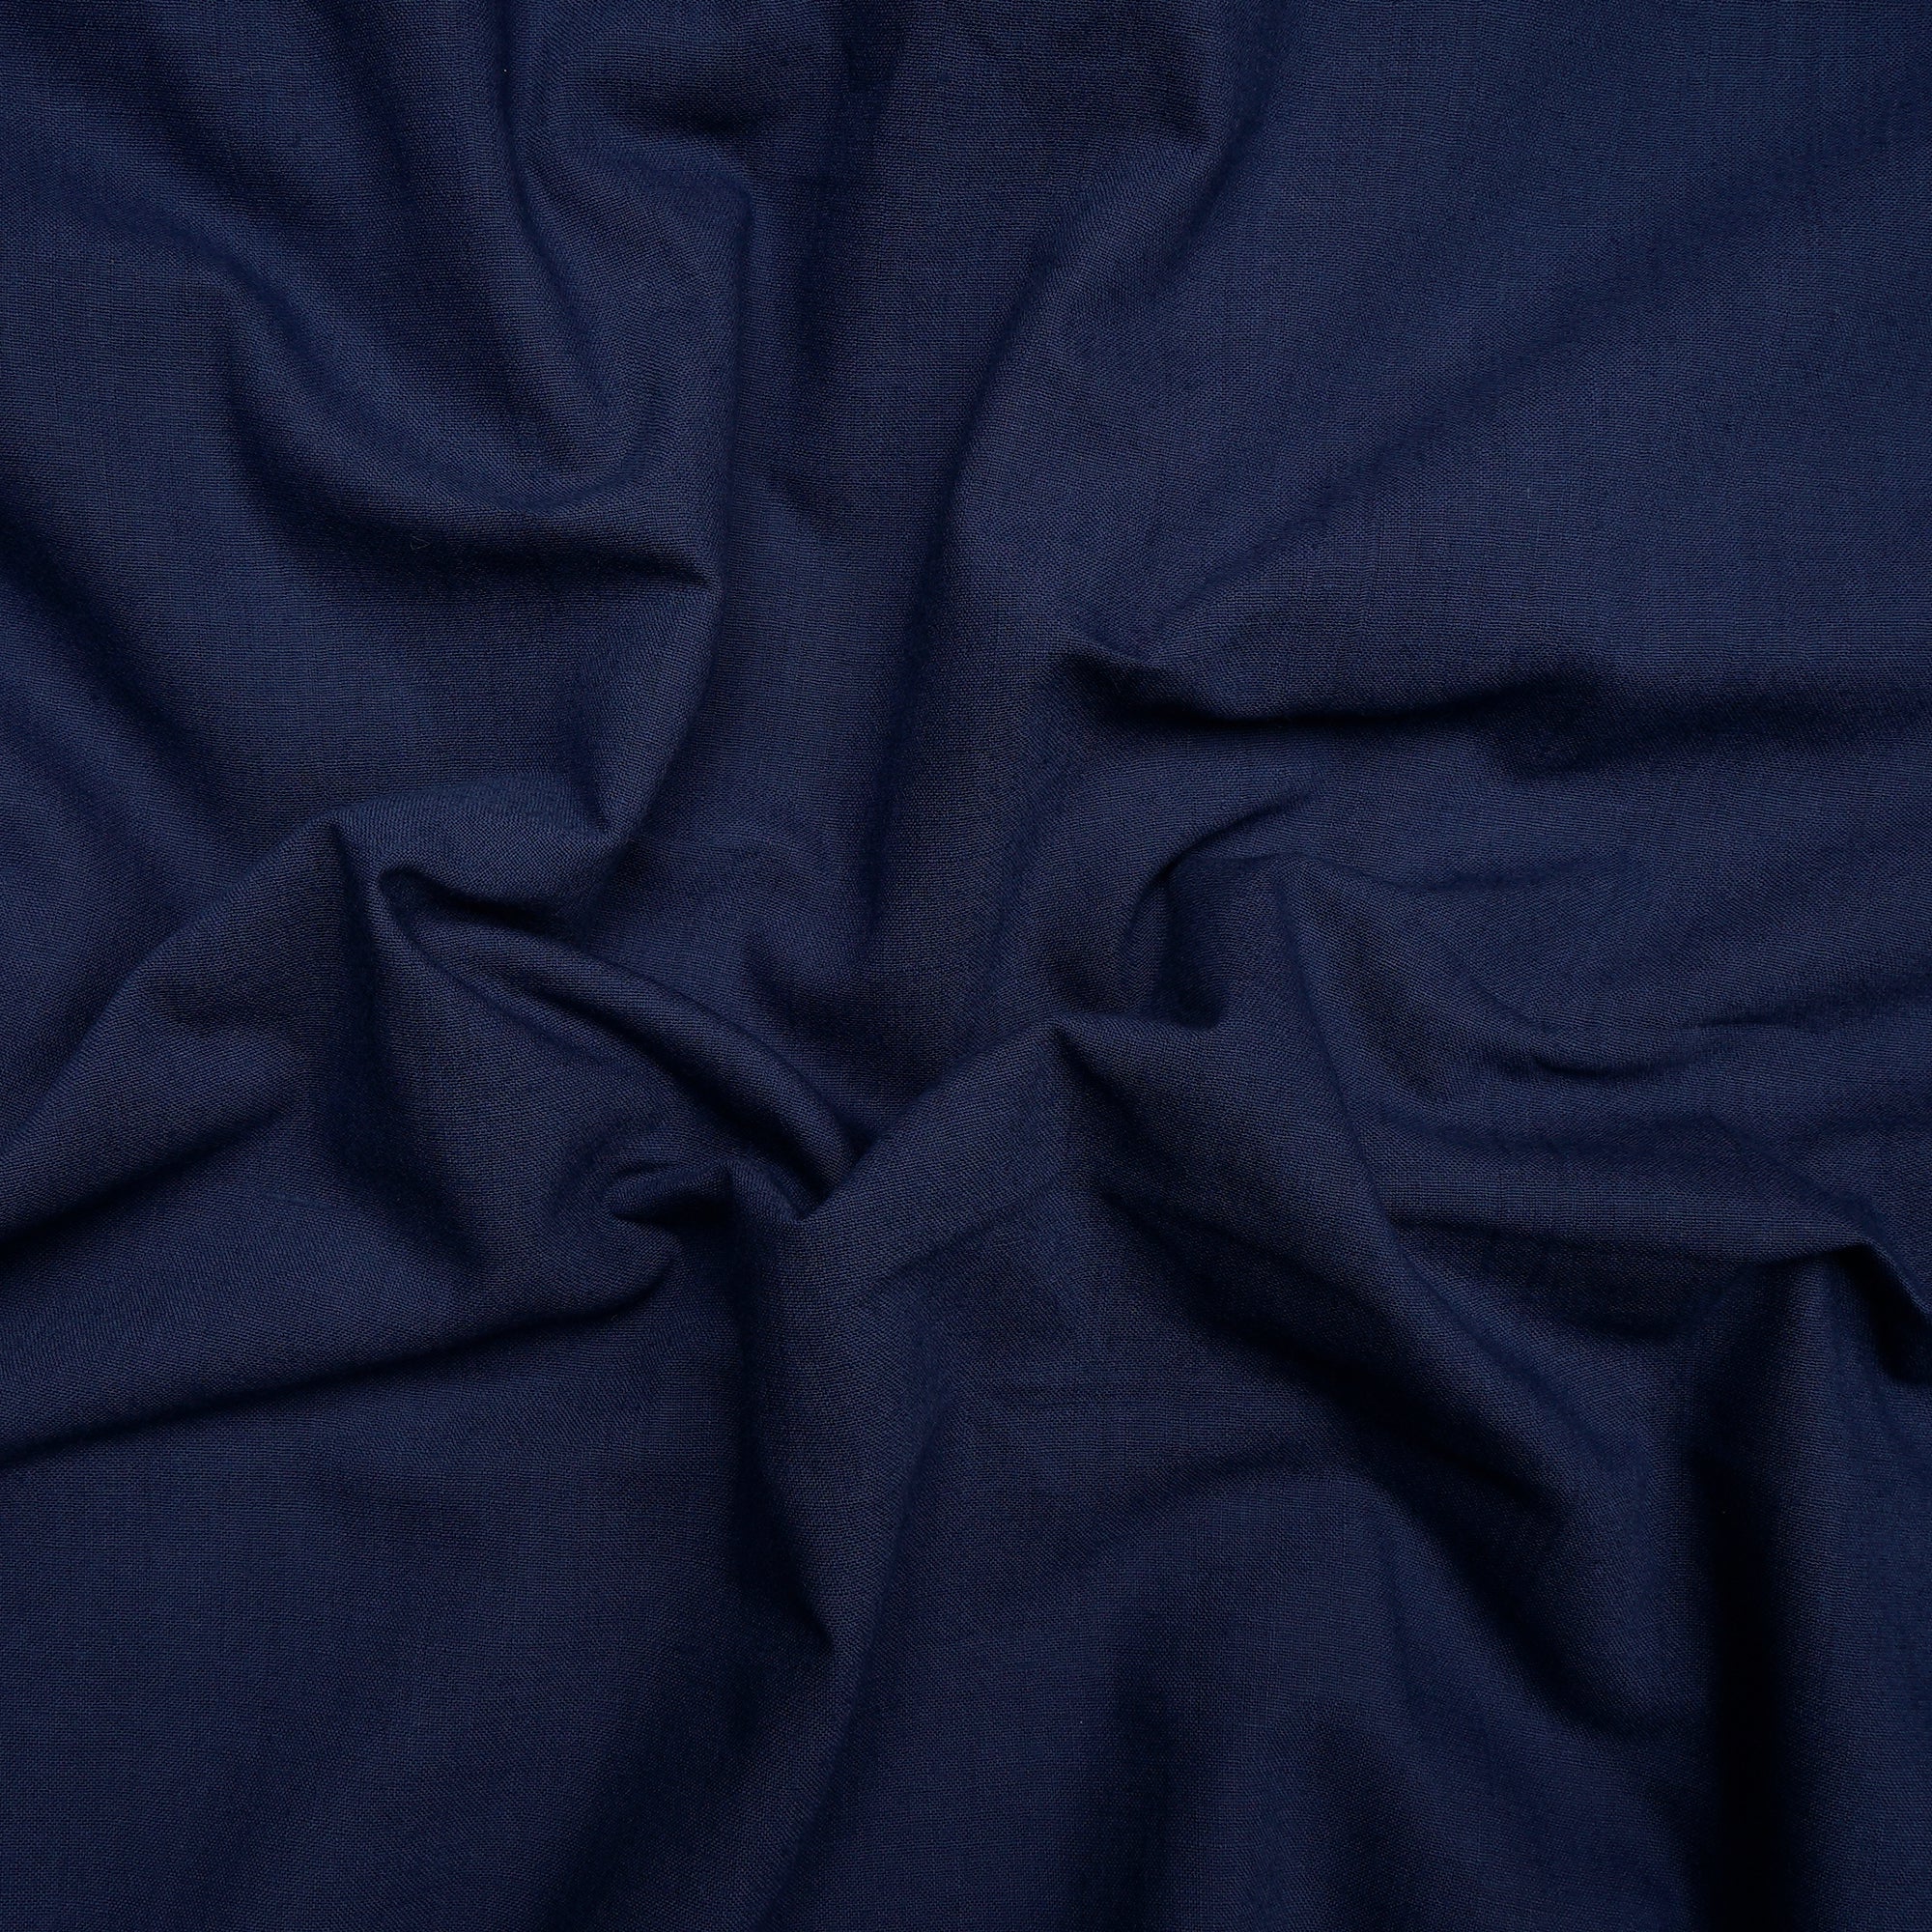 Navy Blue Color Muslin Cotton Fabric